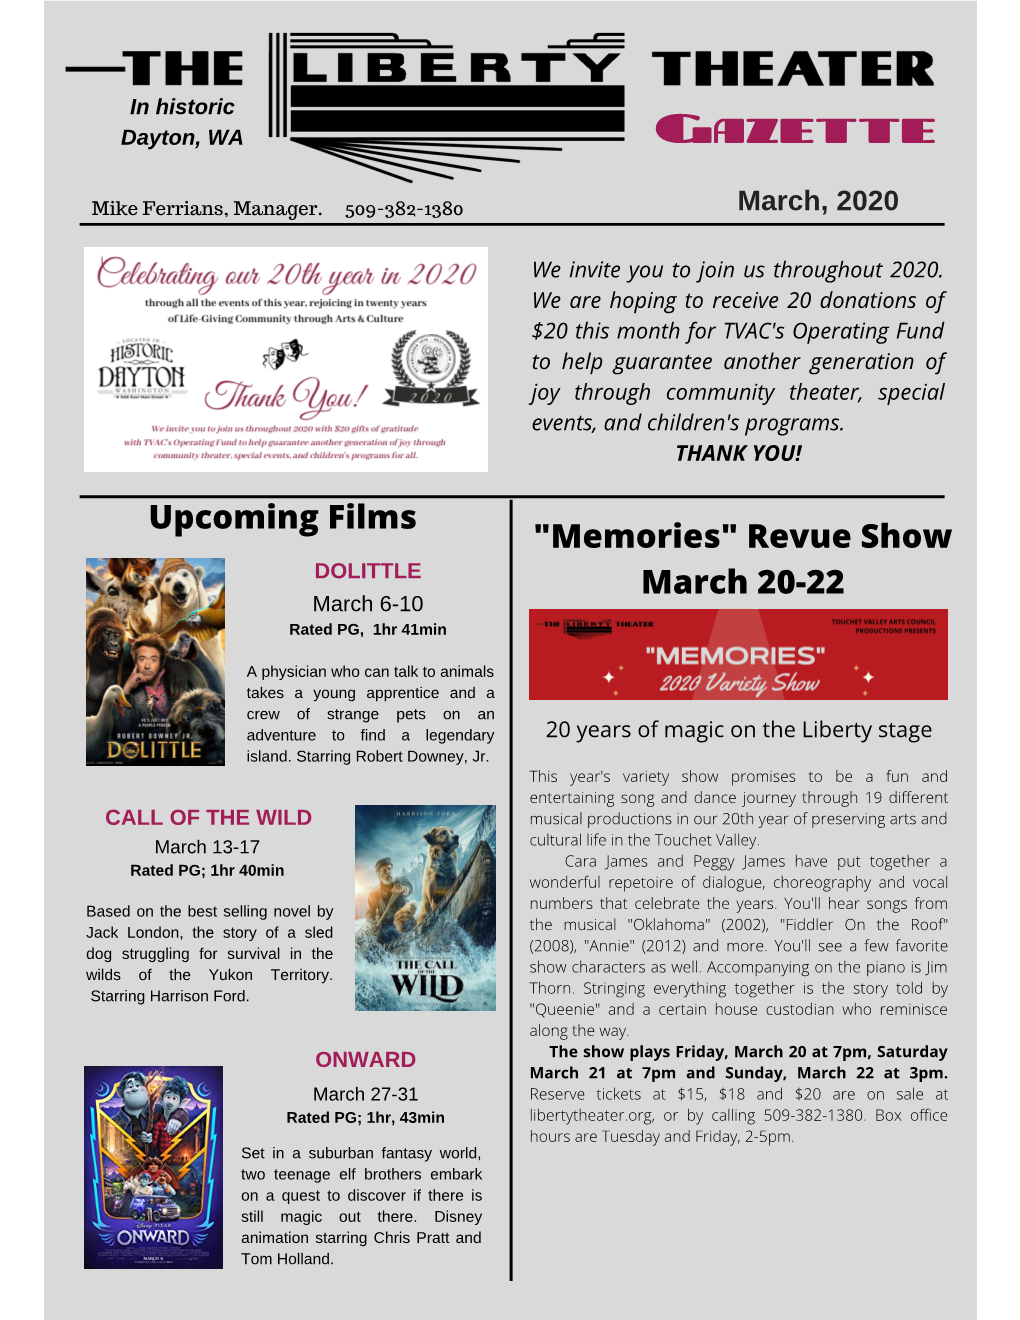 "Memories" Revue Show March 20-22 Upcoming Films